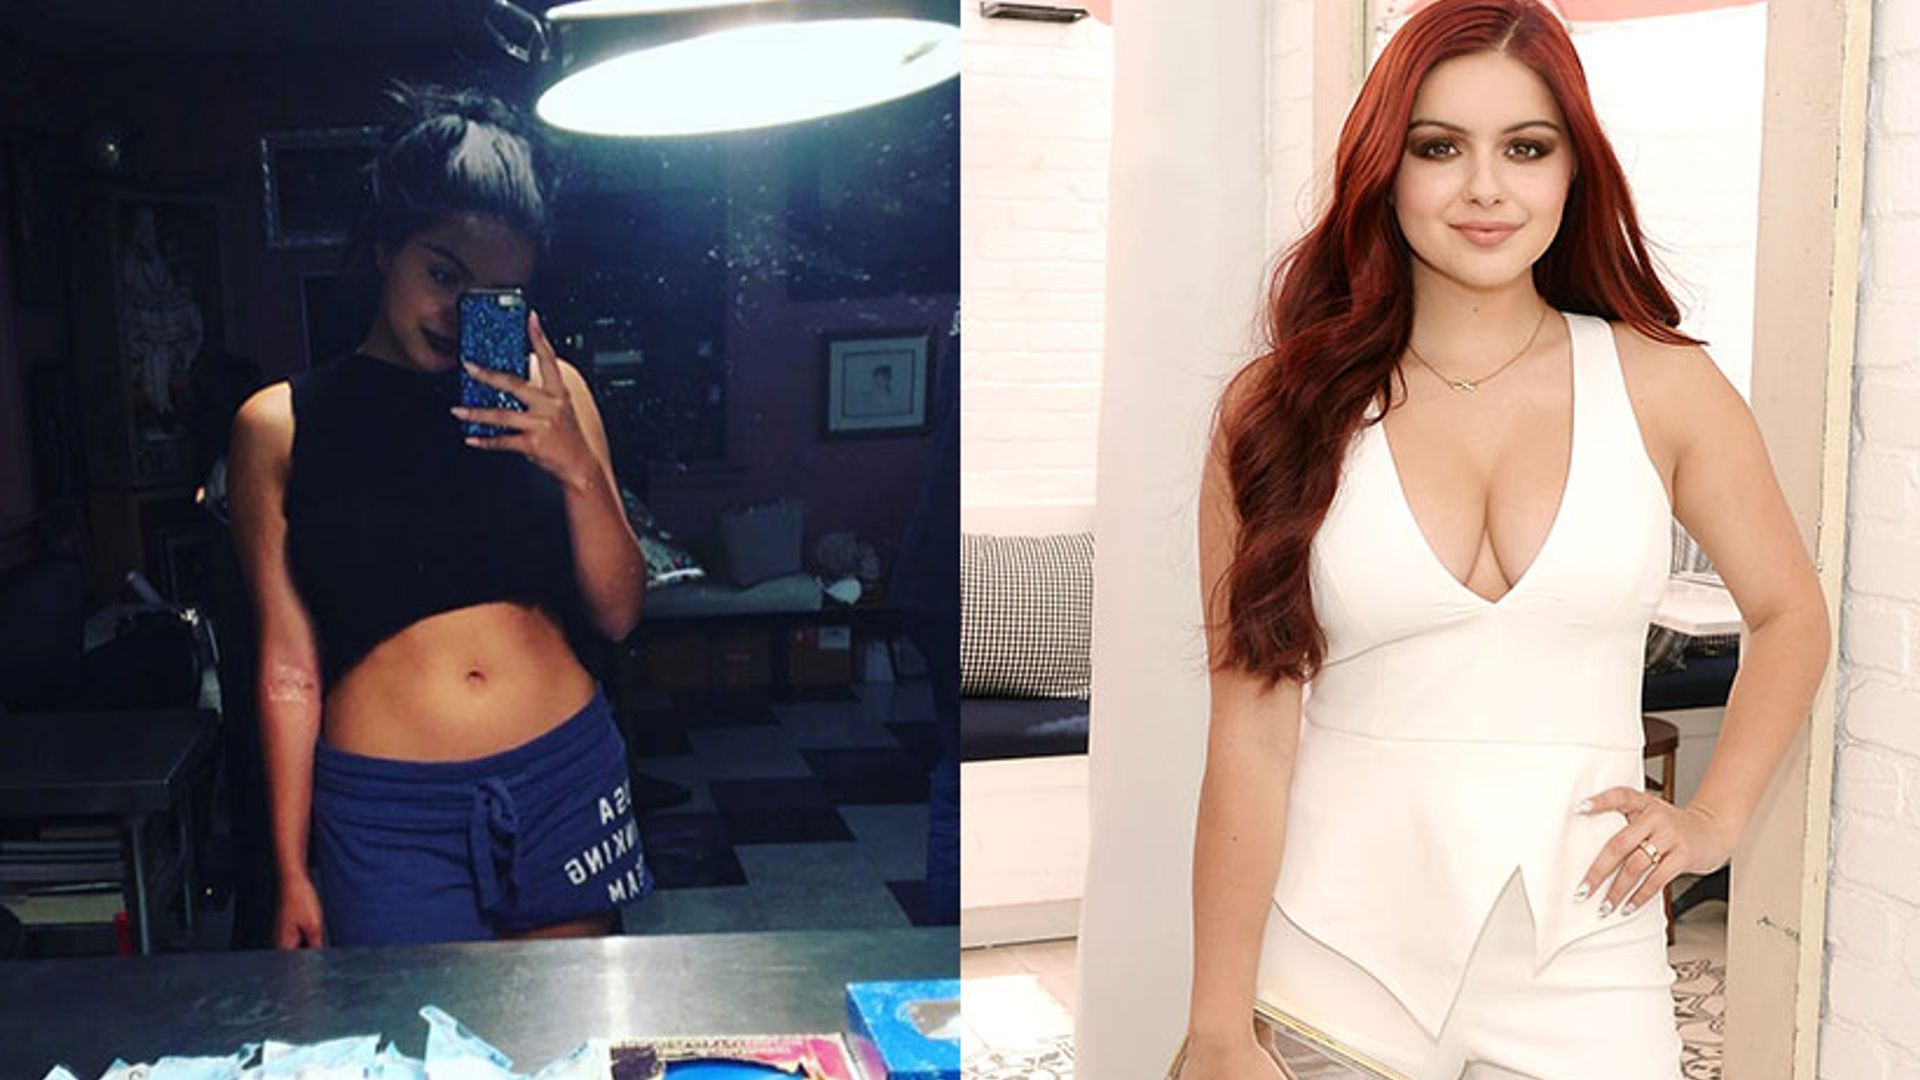 Modern Family star Ariel Winter has gone for a bold new tattoo